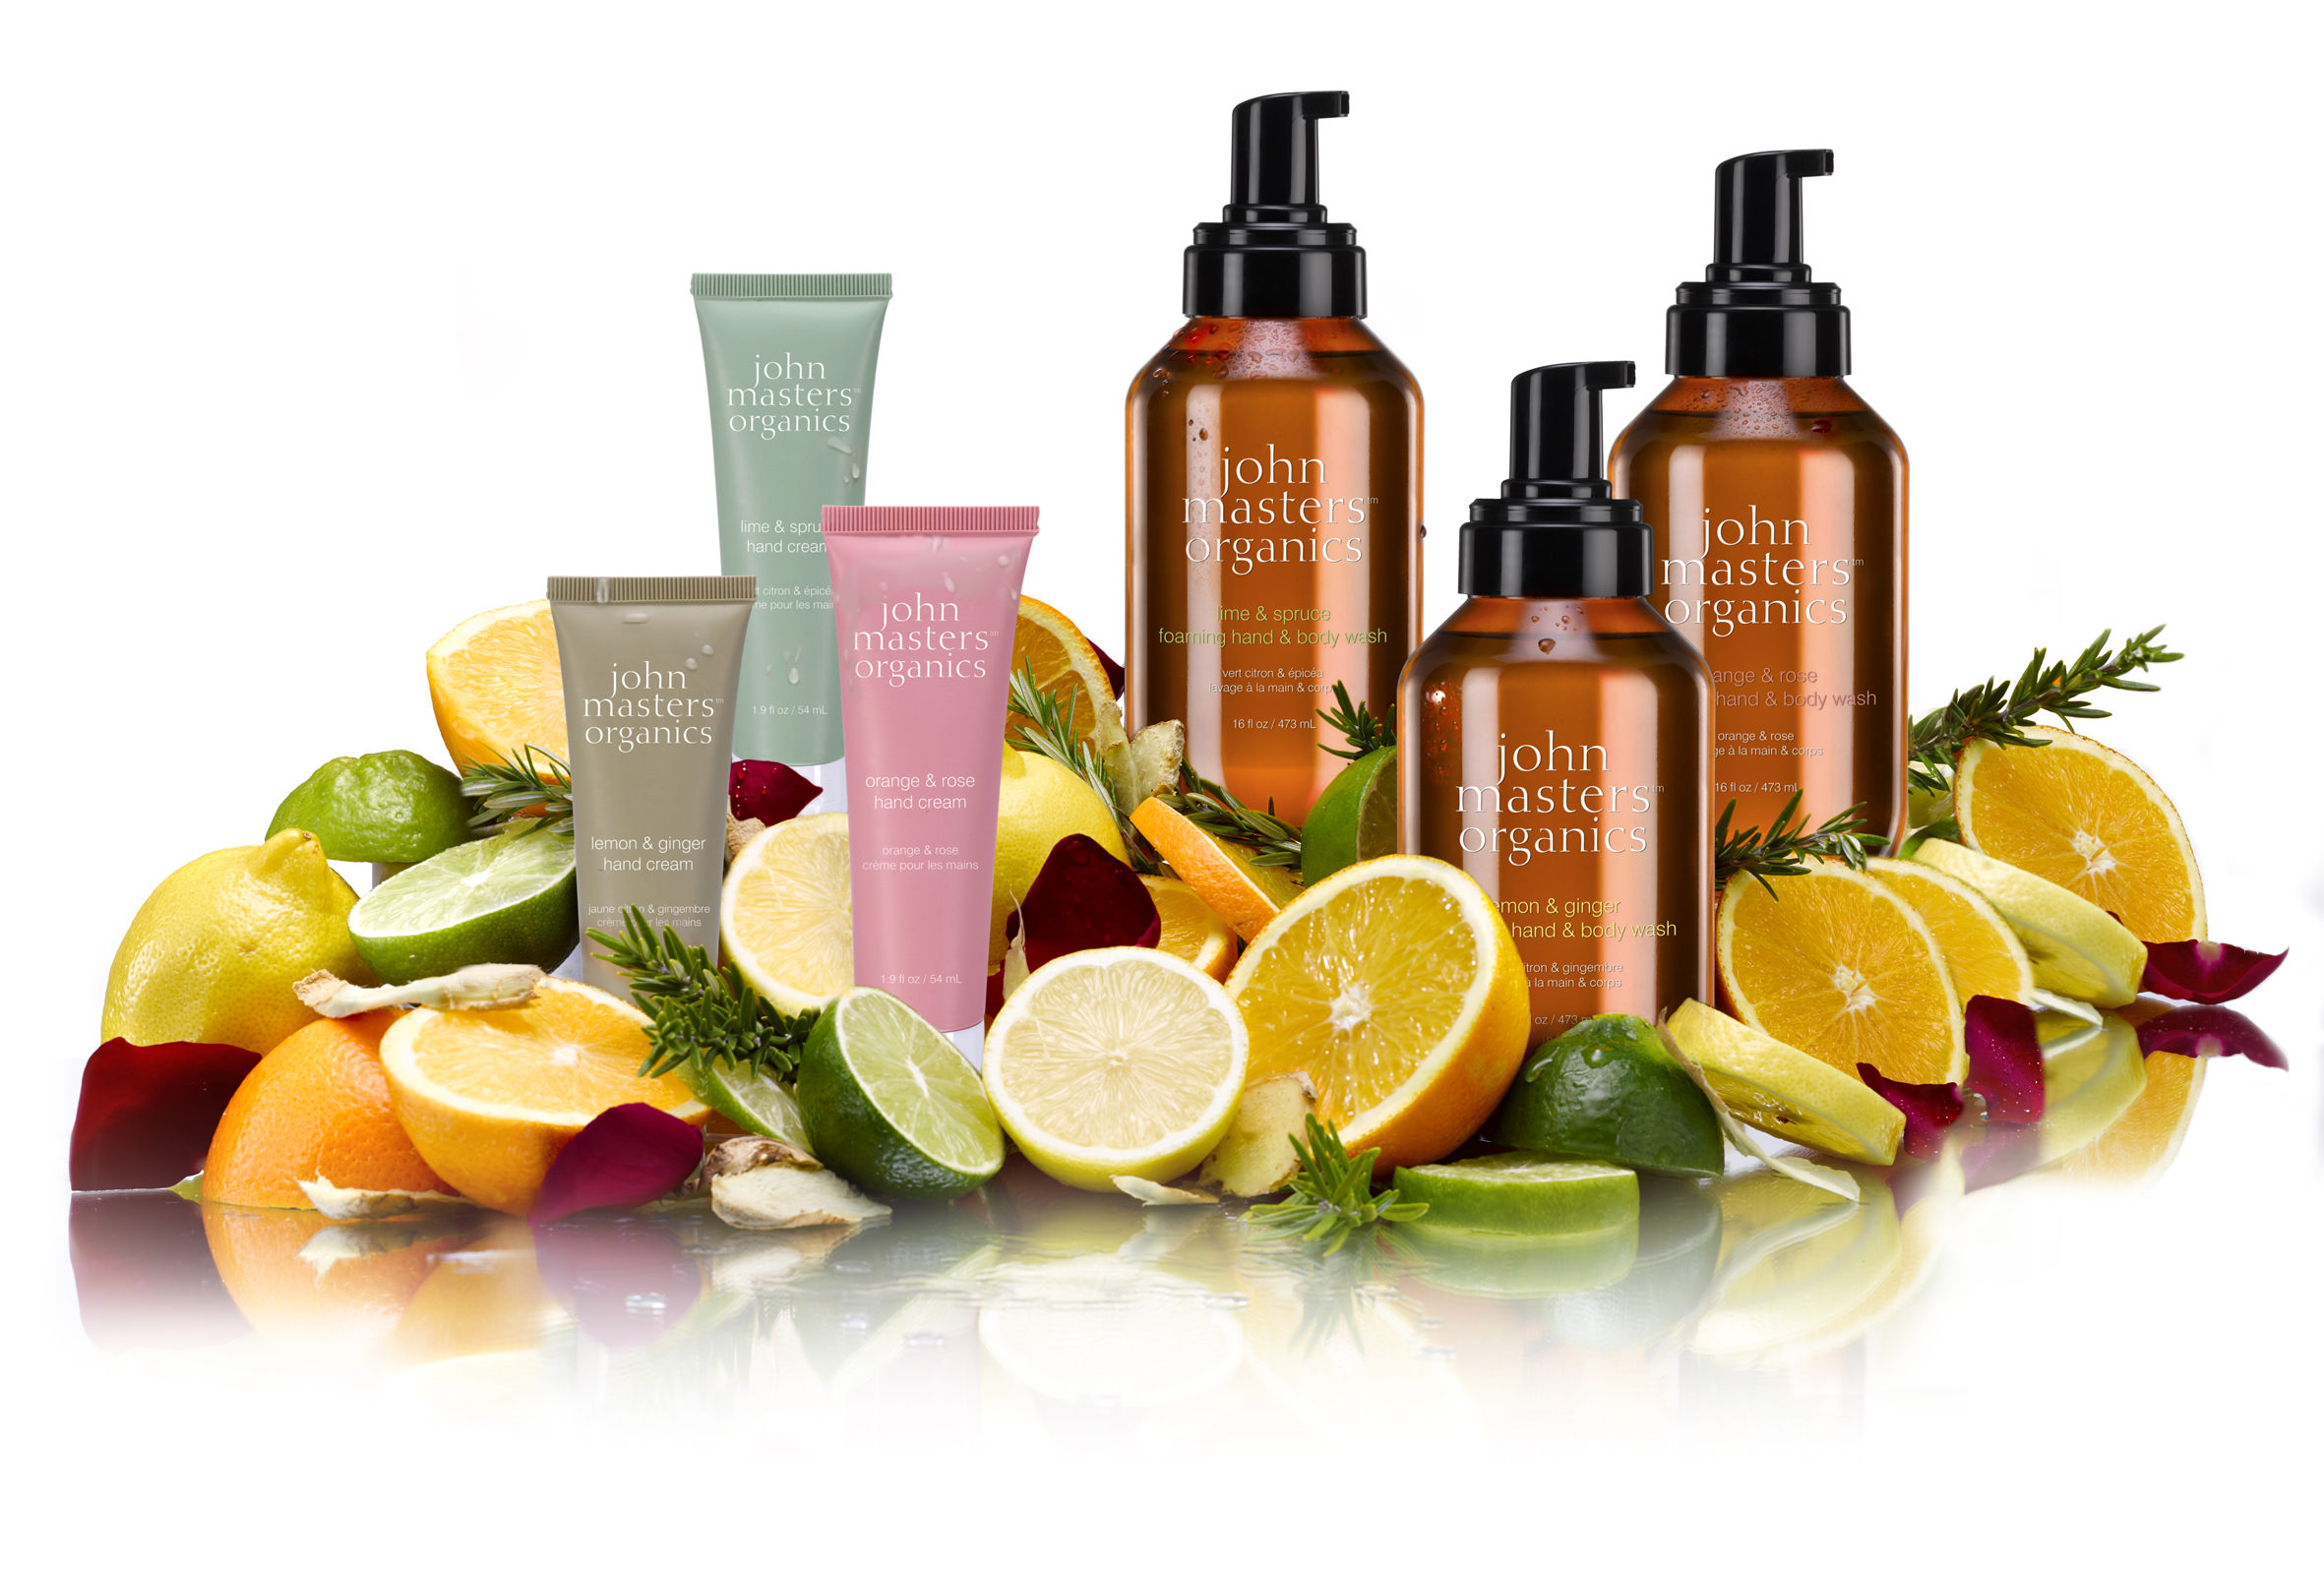 John Masters Organics has announced the launch of its Hand & Body W...